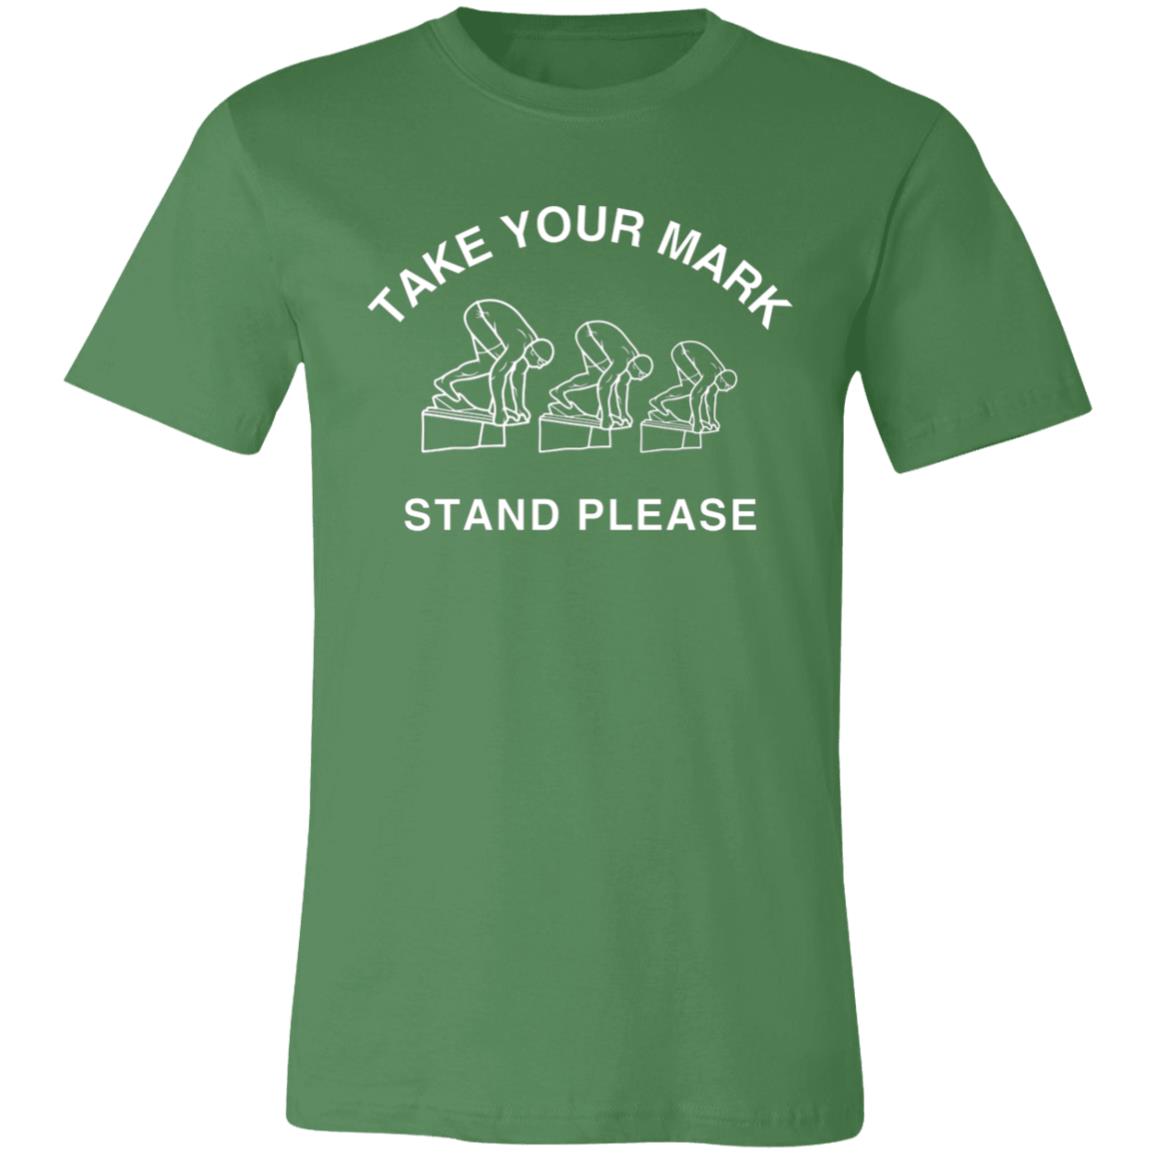 Take Your Mark... Stand Please Comfy T-Shirt